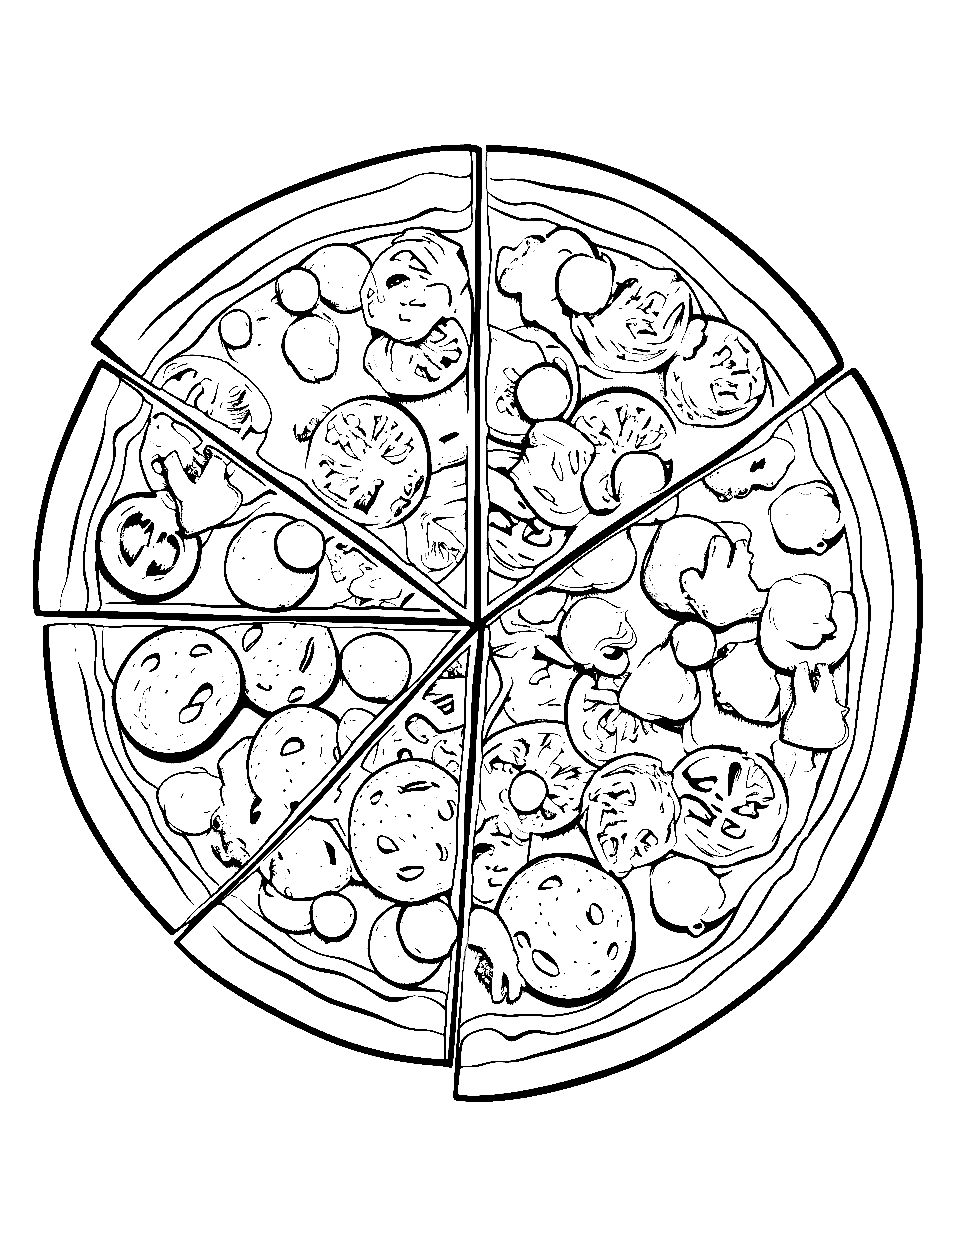 Pizza fiesta Food Coloring Page - A whole pizza with various toppings looking delicious.